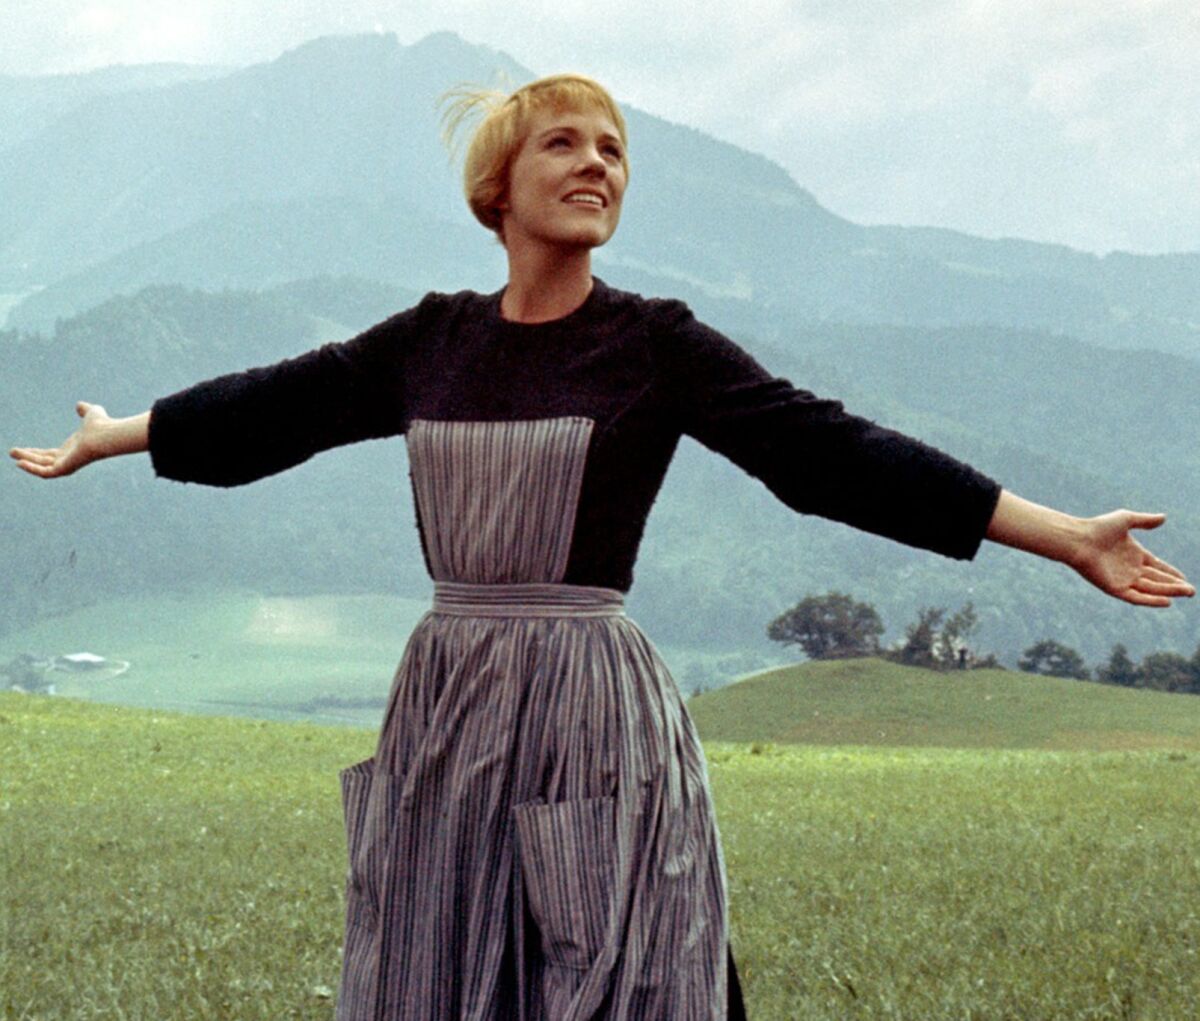 Woman spreads her arms and smiles in grassy valley with mountains in the background 